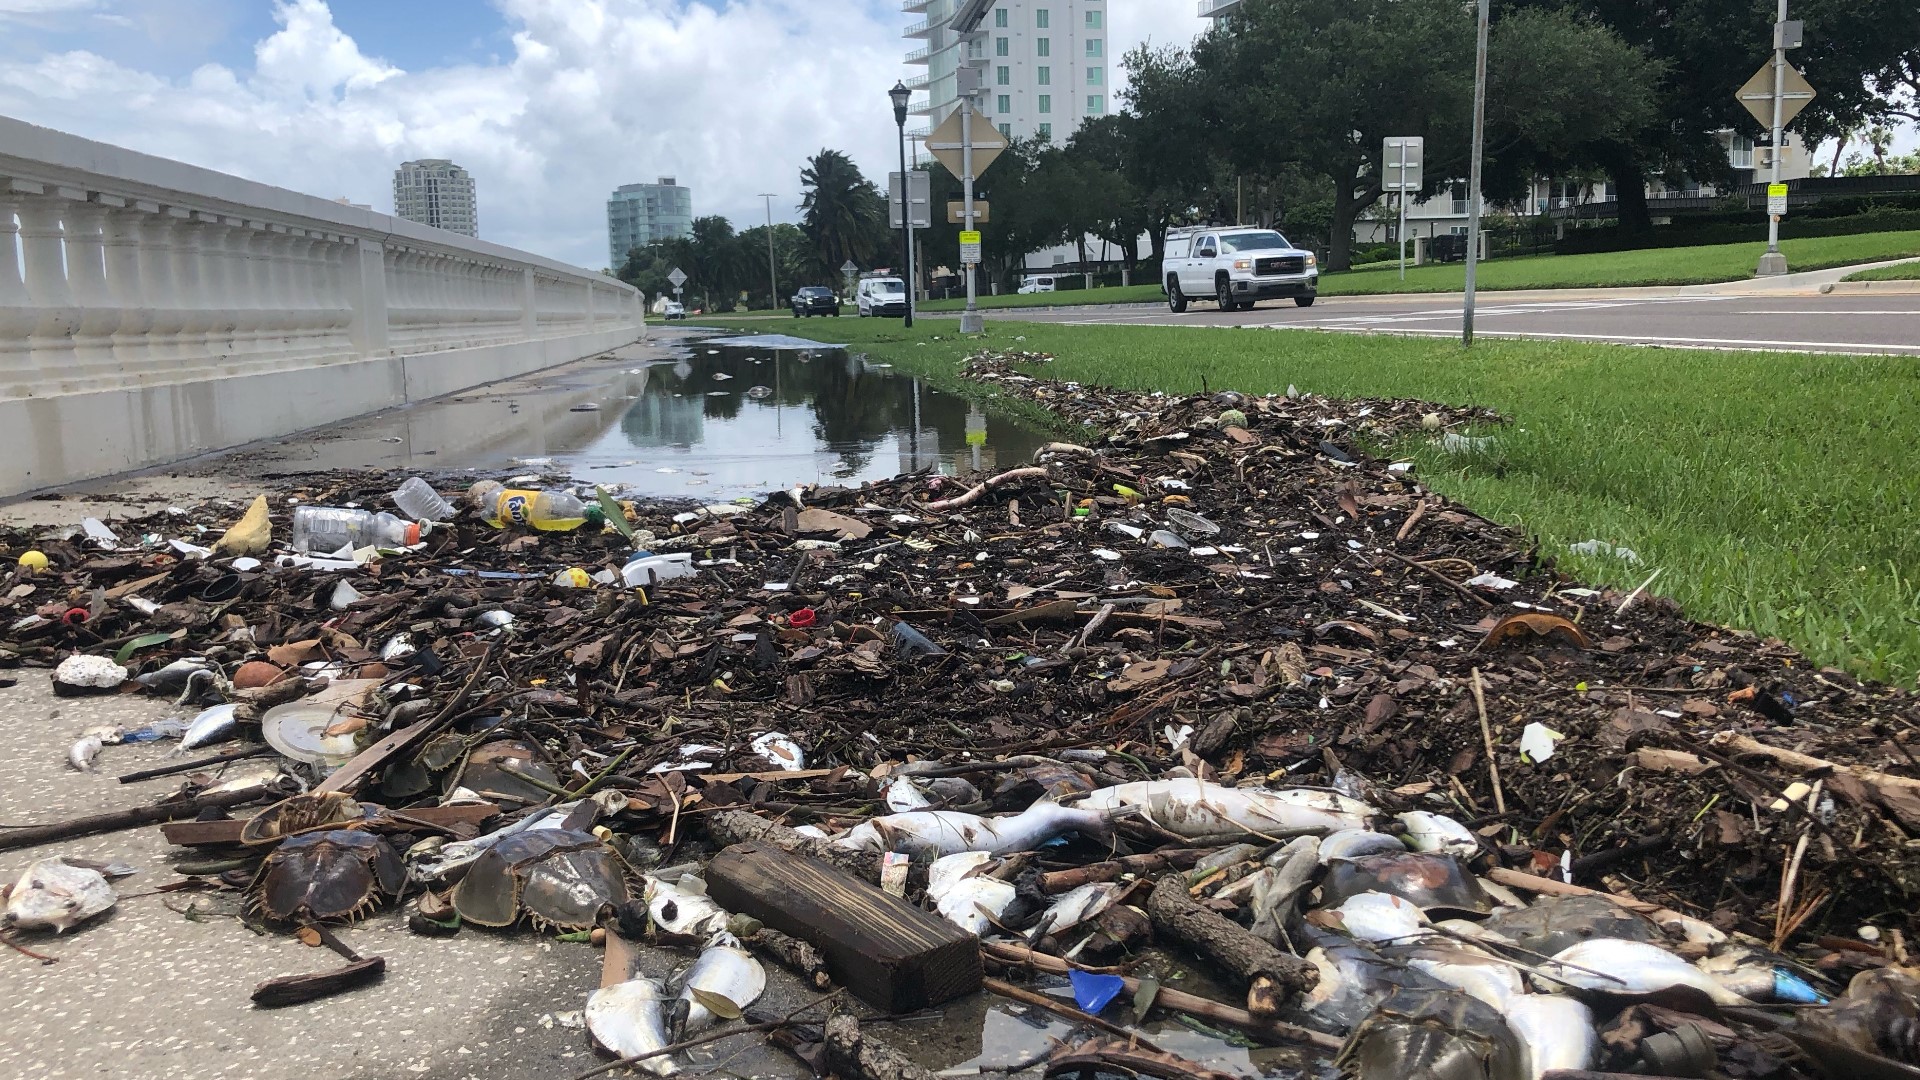 Thousands of dead fish washed up on Bayshore Blvd in south Tampa.